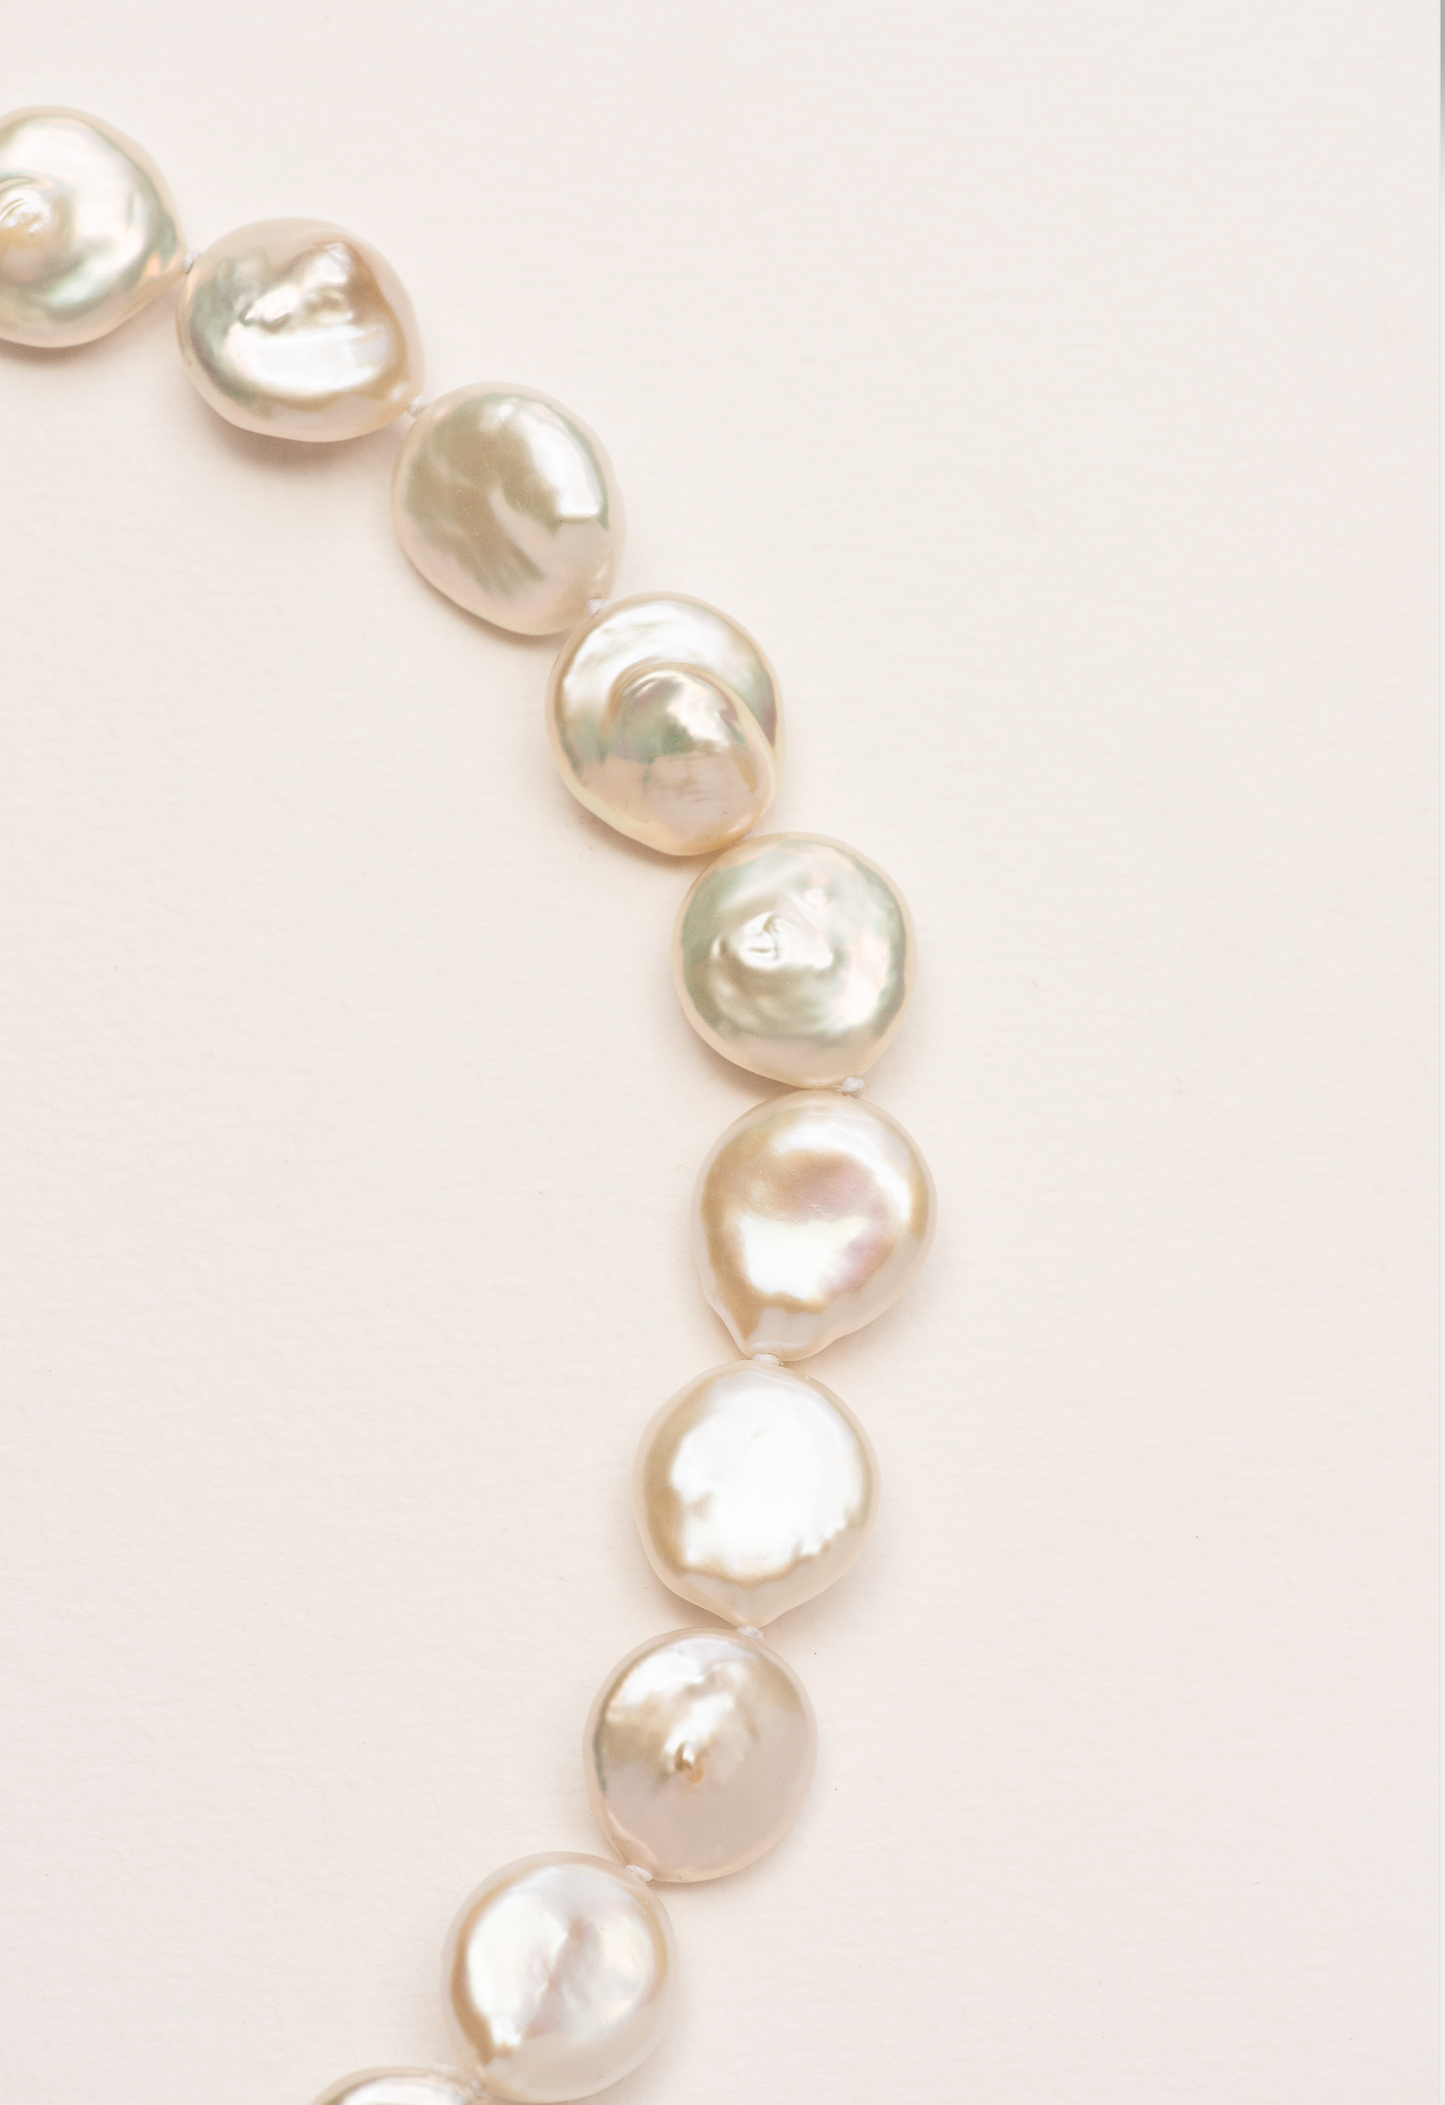 Baroque Pearls with Fermoir